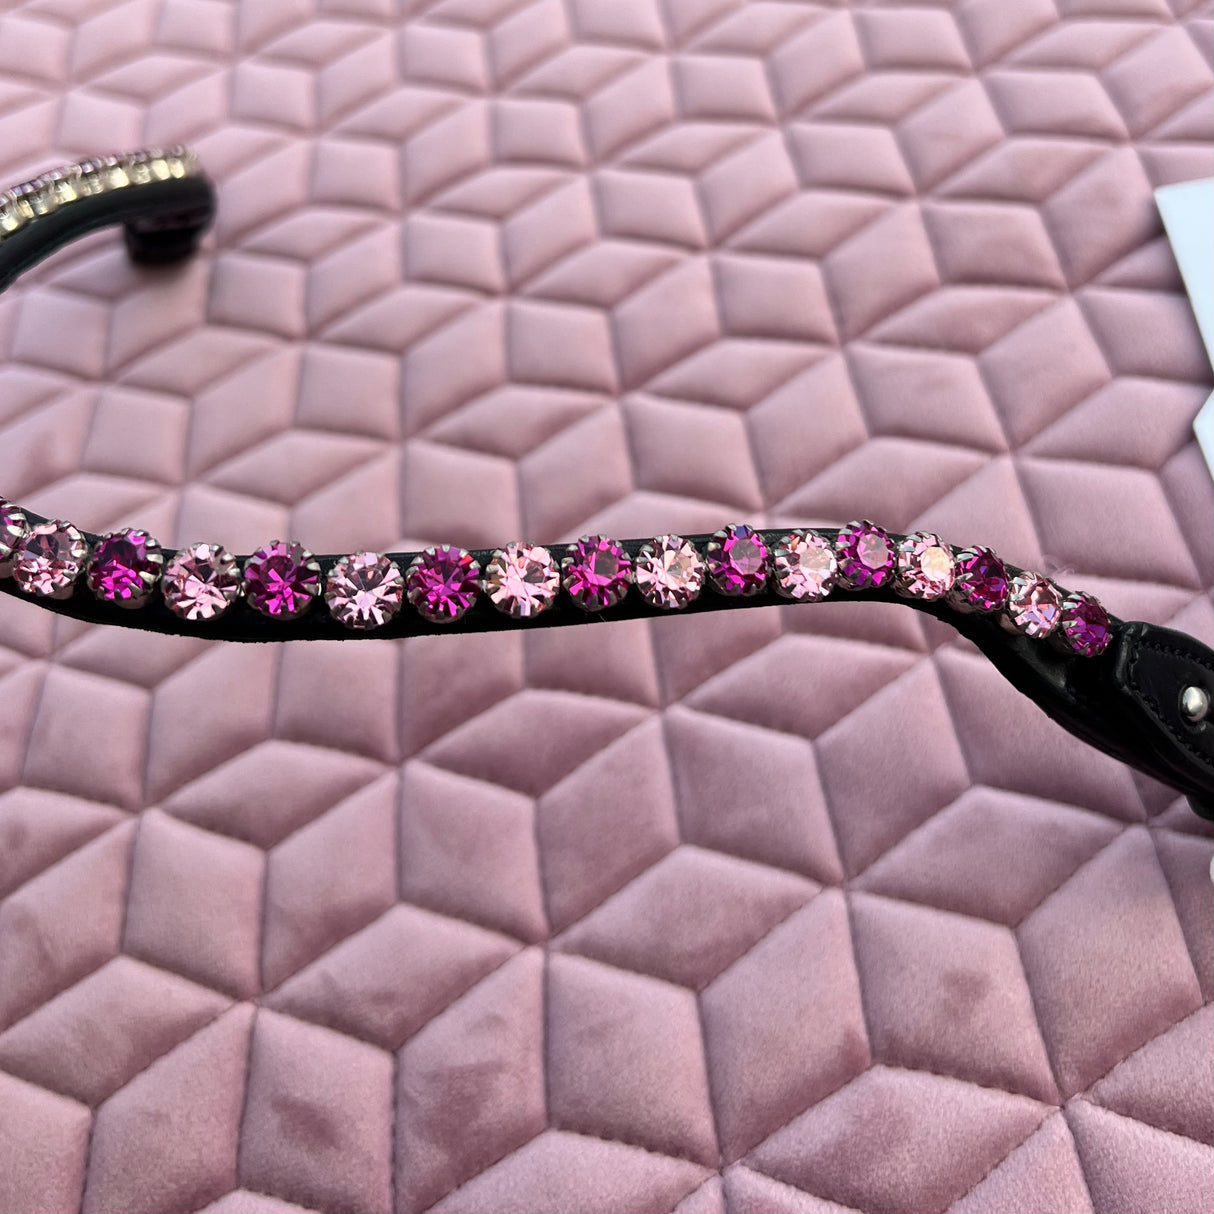 IN STOCK - Utzon Equestrian Elegant Browband Party Pink